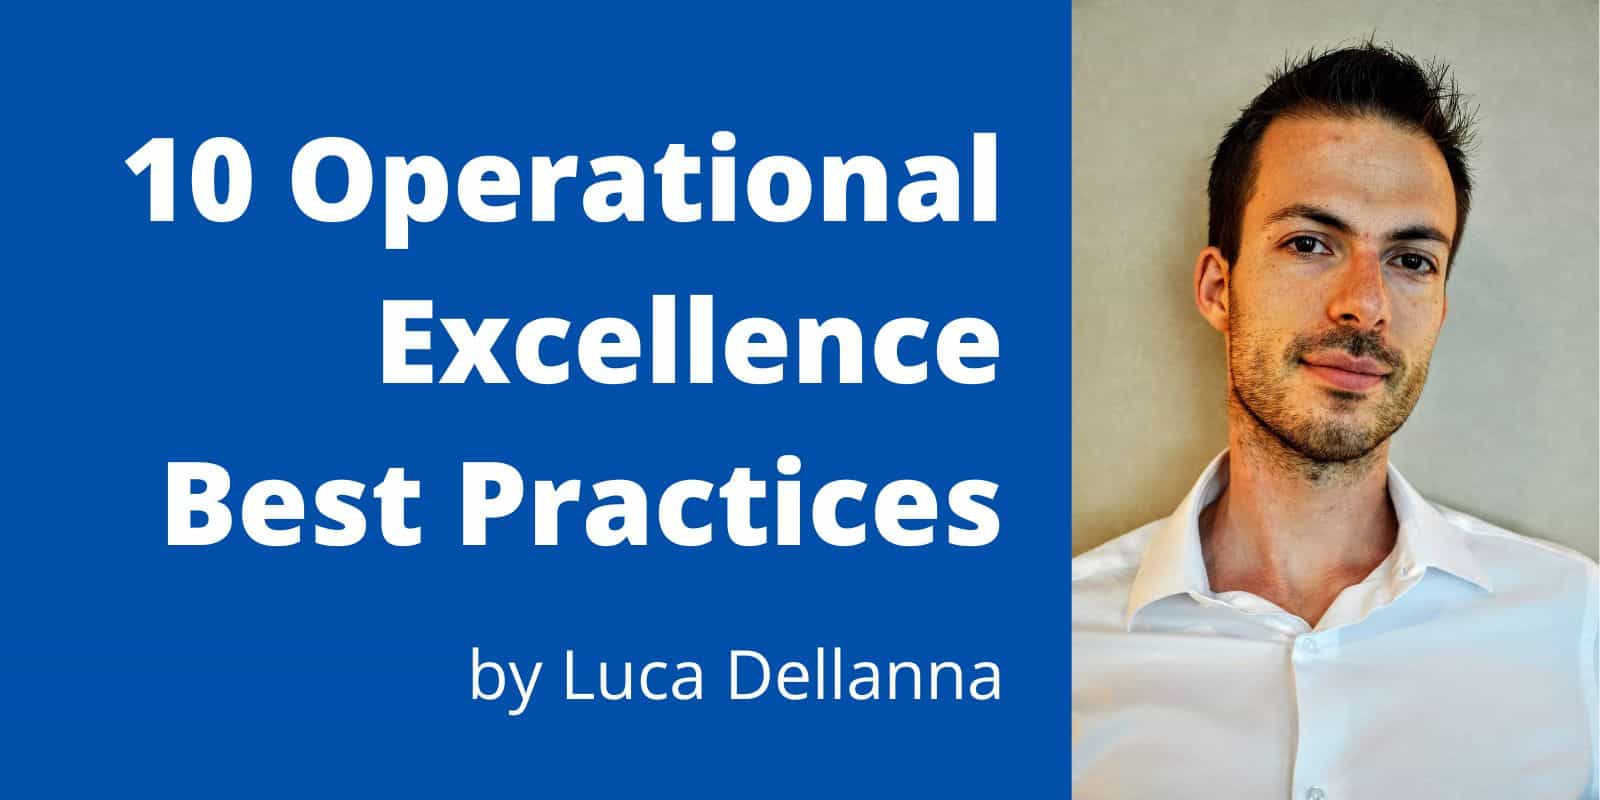 10 Operational Excellence Best Practices